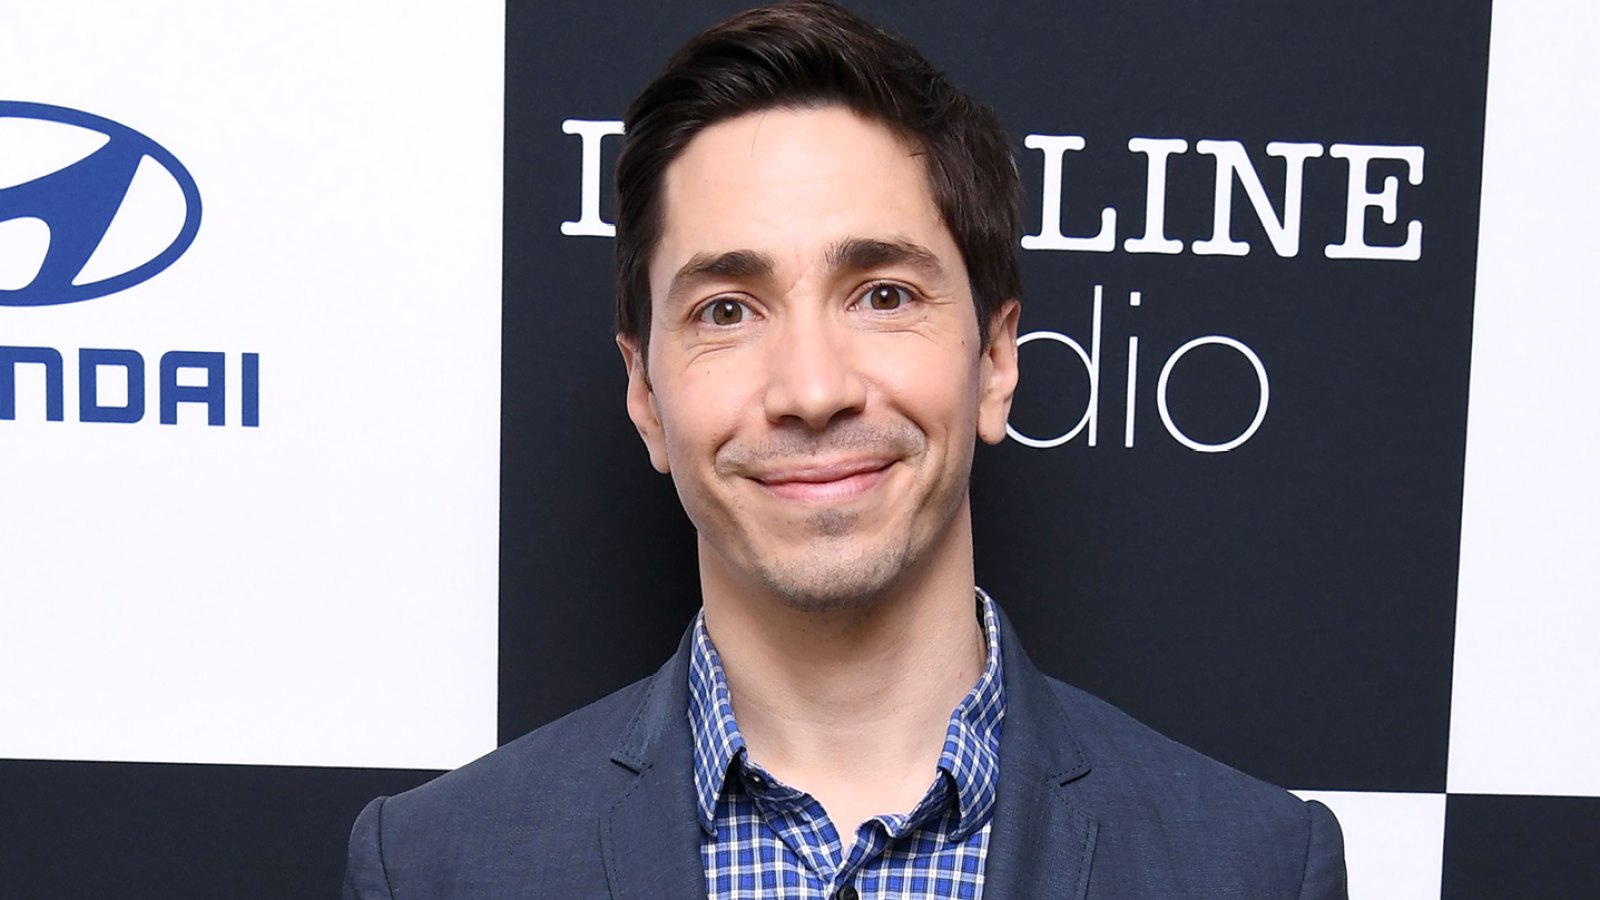 Justin Long Teases Which of His Movies He’d ‘Relive’ in Quarantine